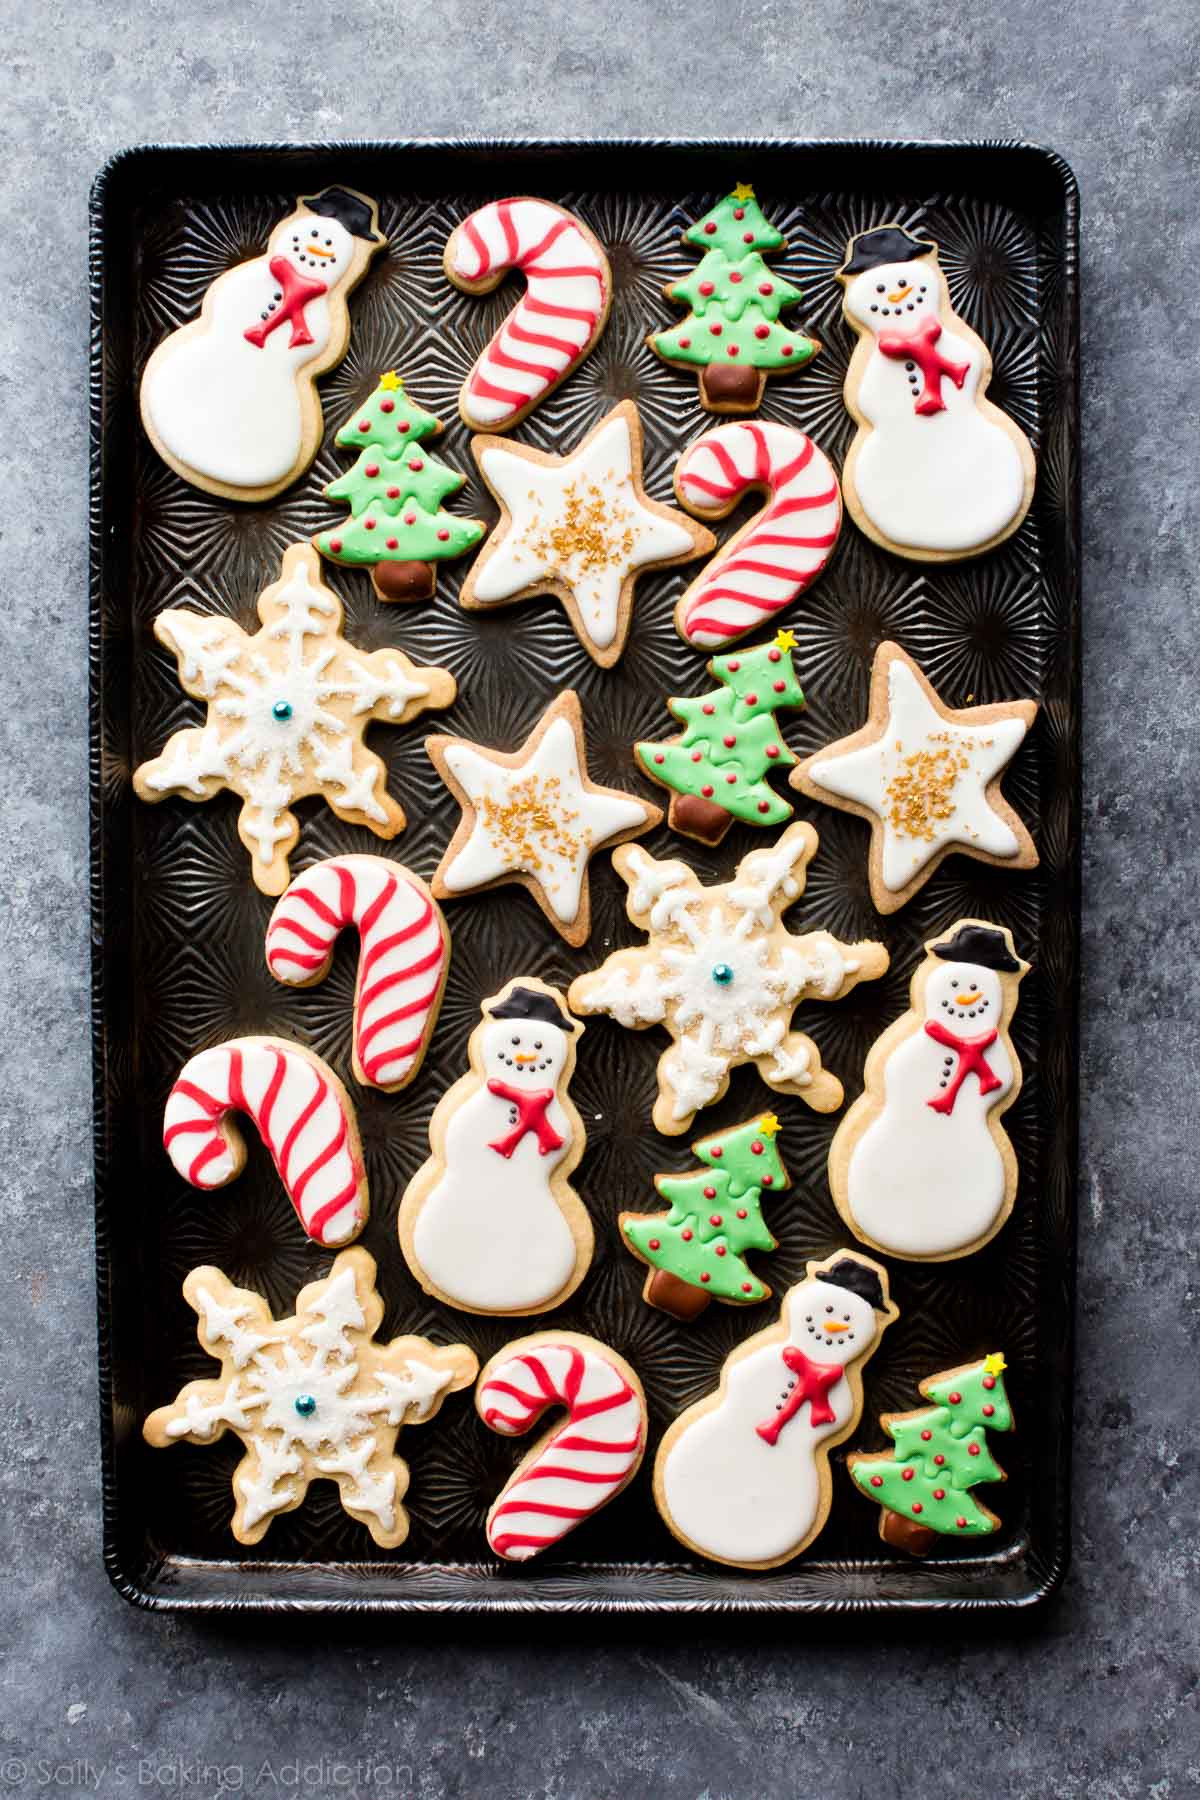 Christmas Decorated Cookies
 1 Sugar Cookie Dough 5 Ways to Decorate Sallys Baking